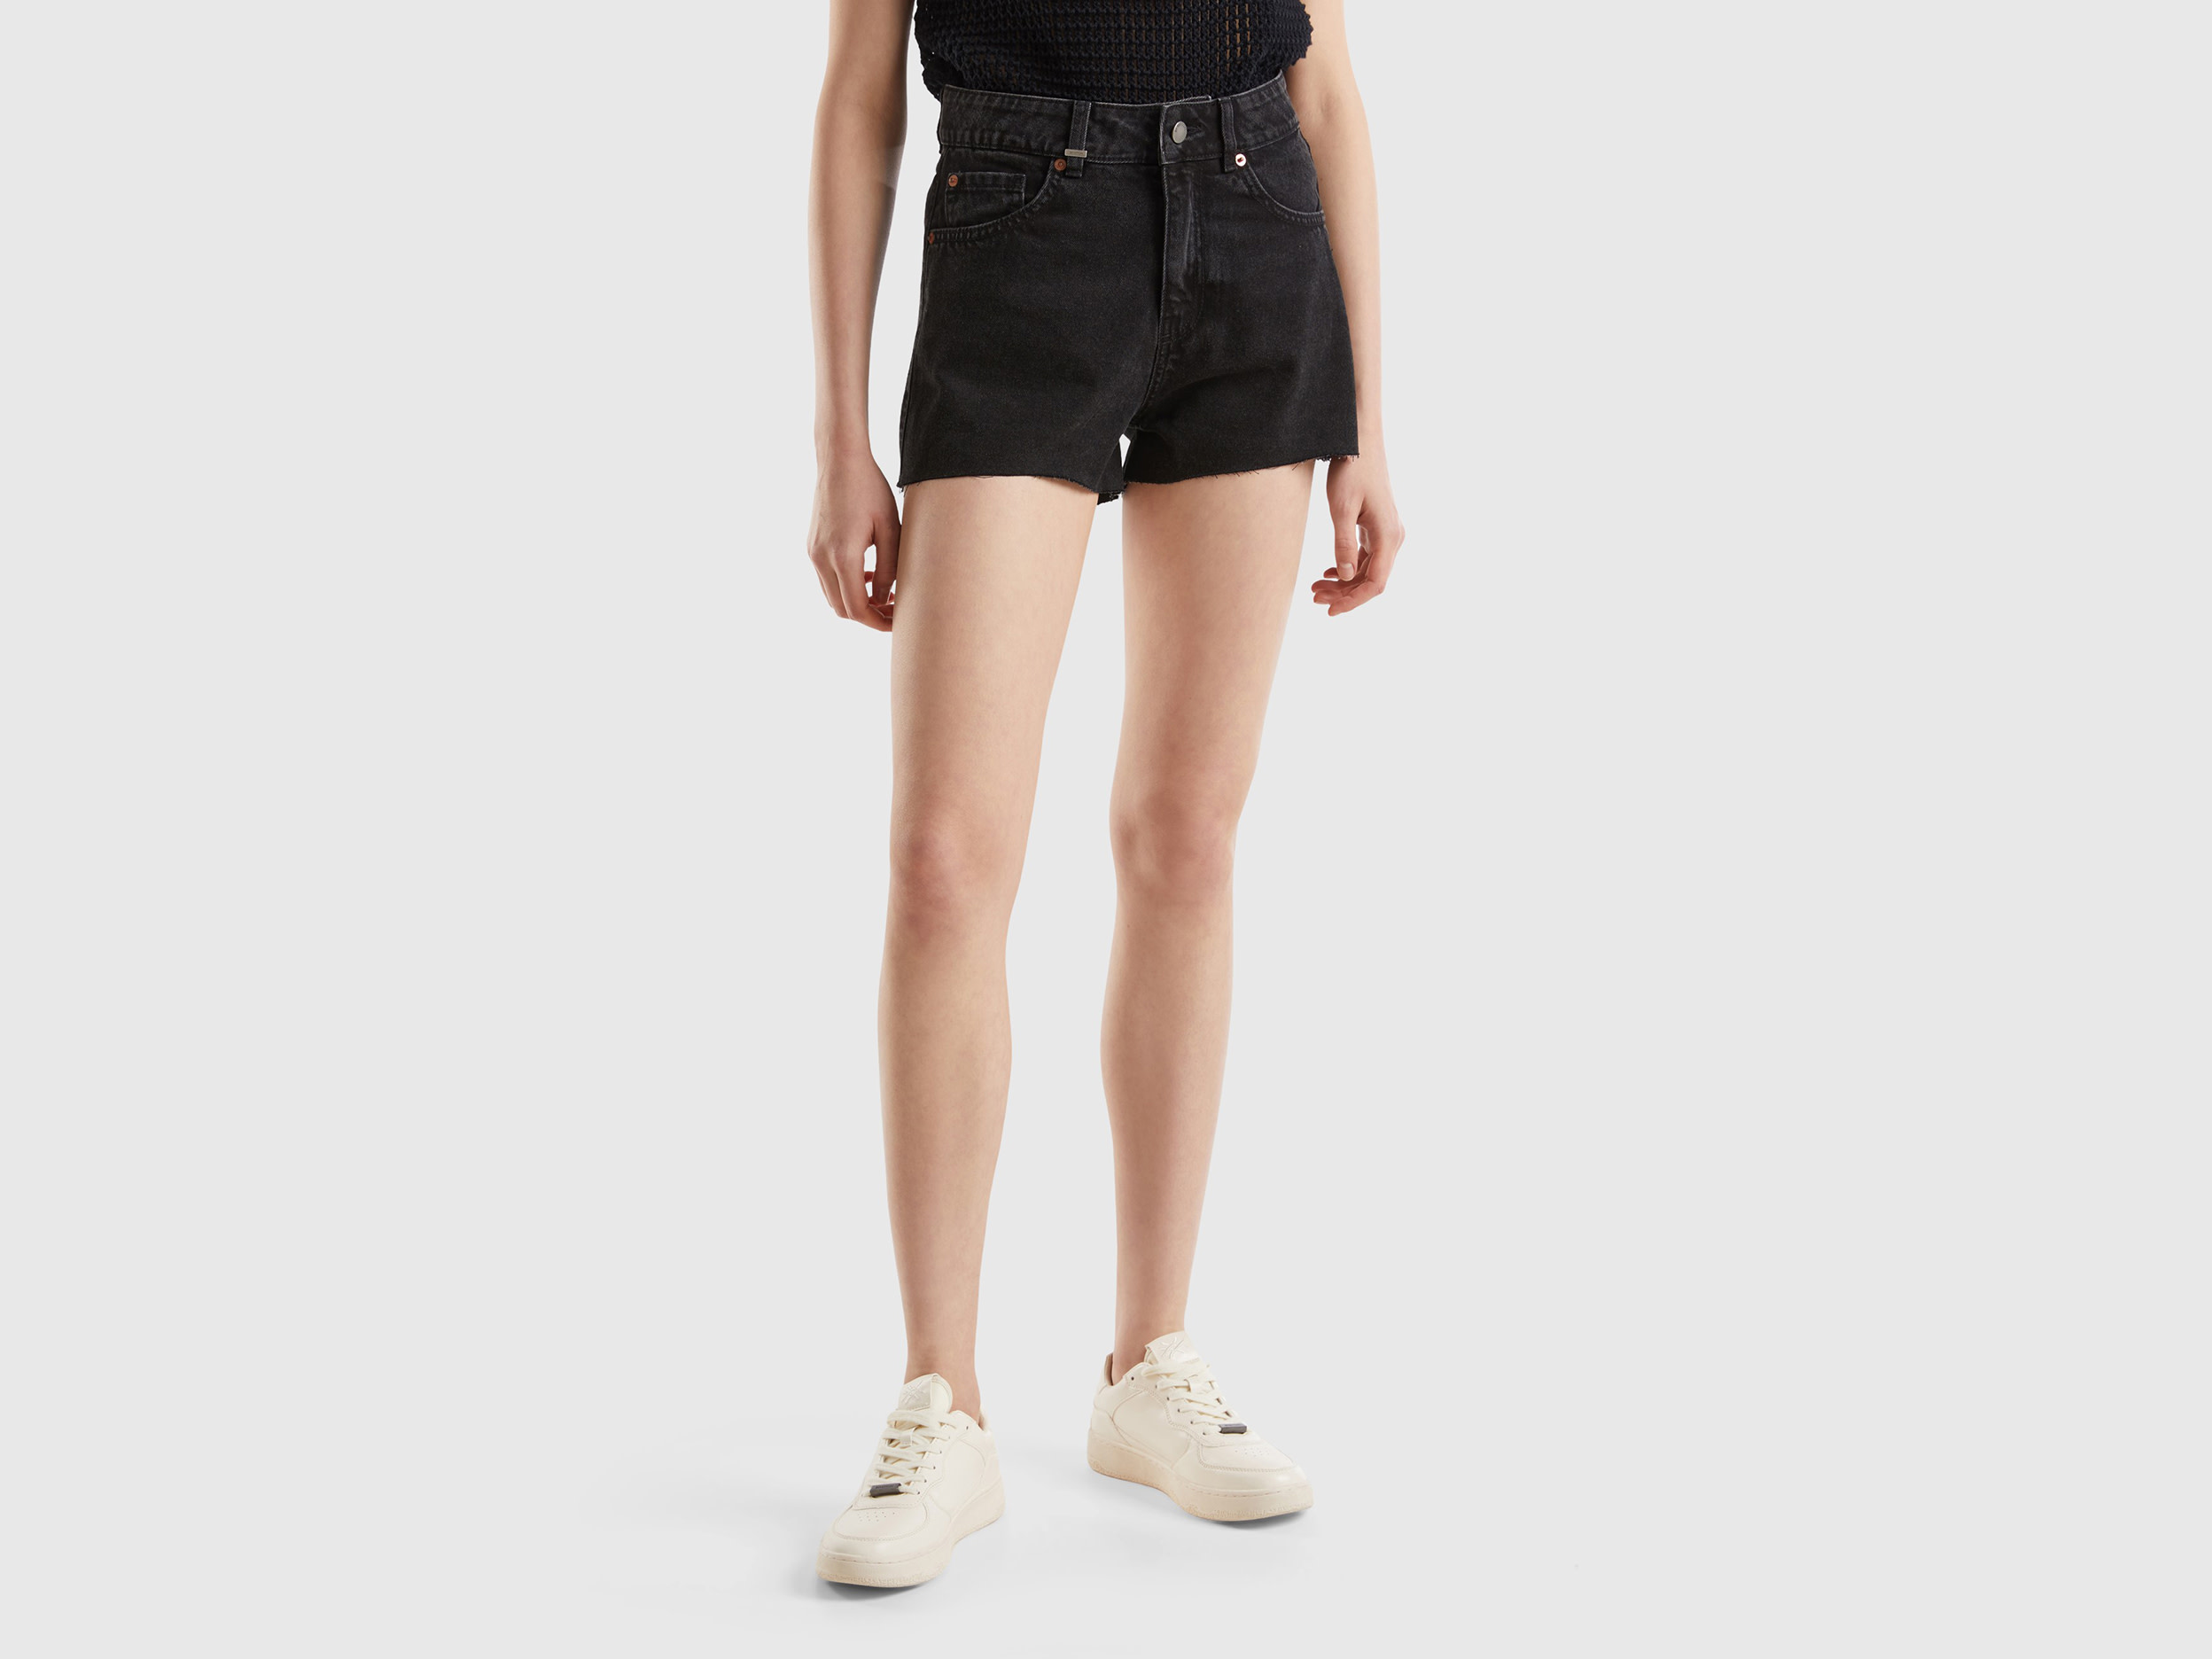 Image of Benetton, Frayed Shorts In Recycled Cotton Blend, size 27, Black, Women